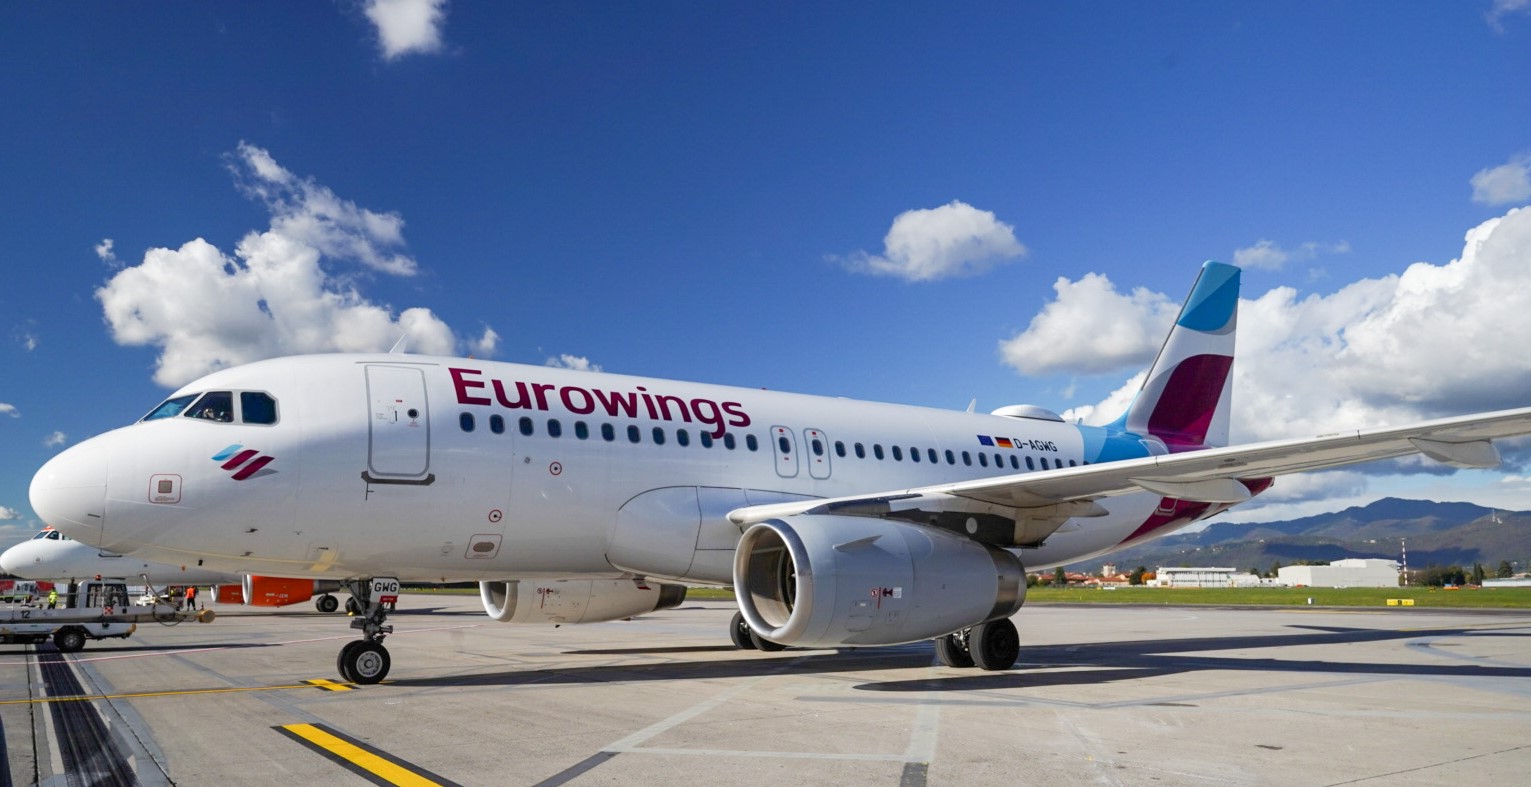 Eurowings flies from Bergamo to Hanover, for elite passengers all Miles&More benefits